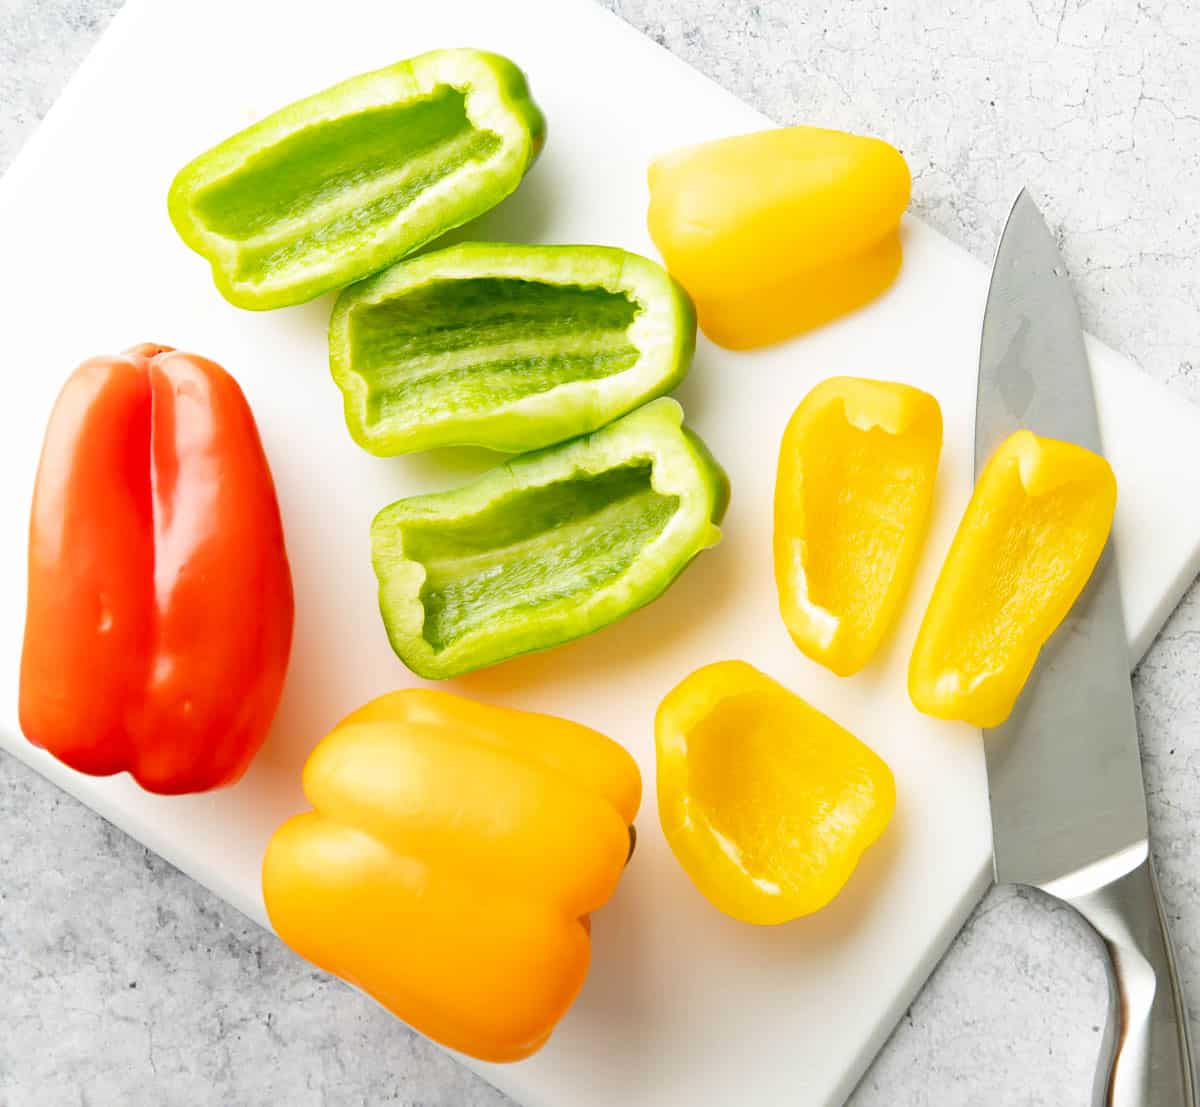 Photo showing How to make Roasted Bell Peppers – Slicing bell peppers on a cutting board